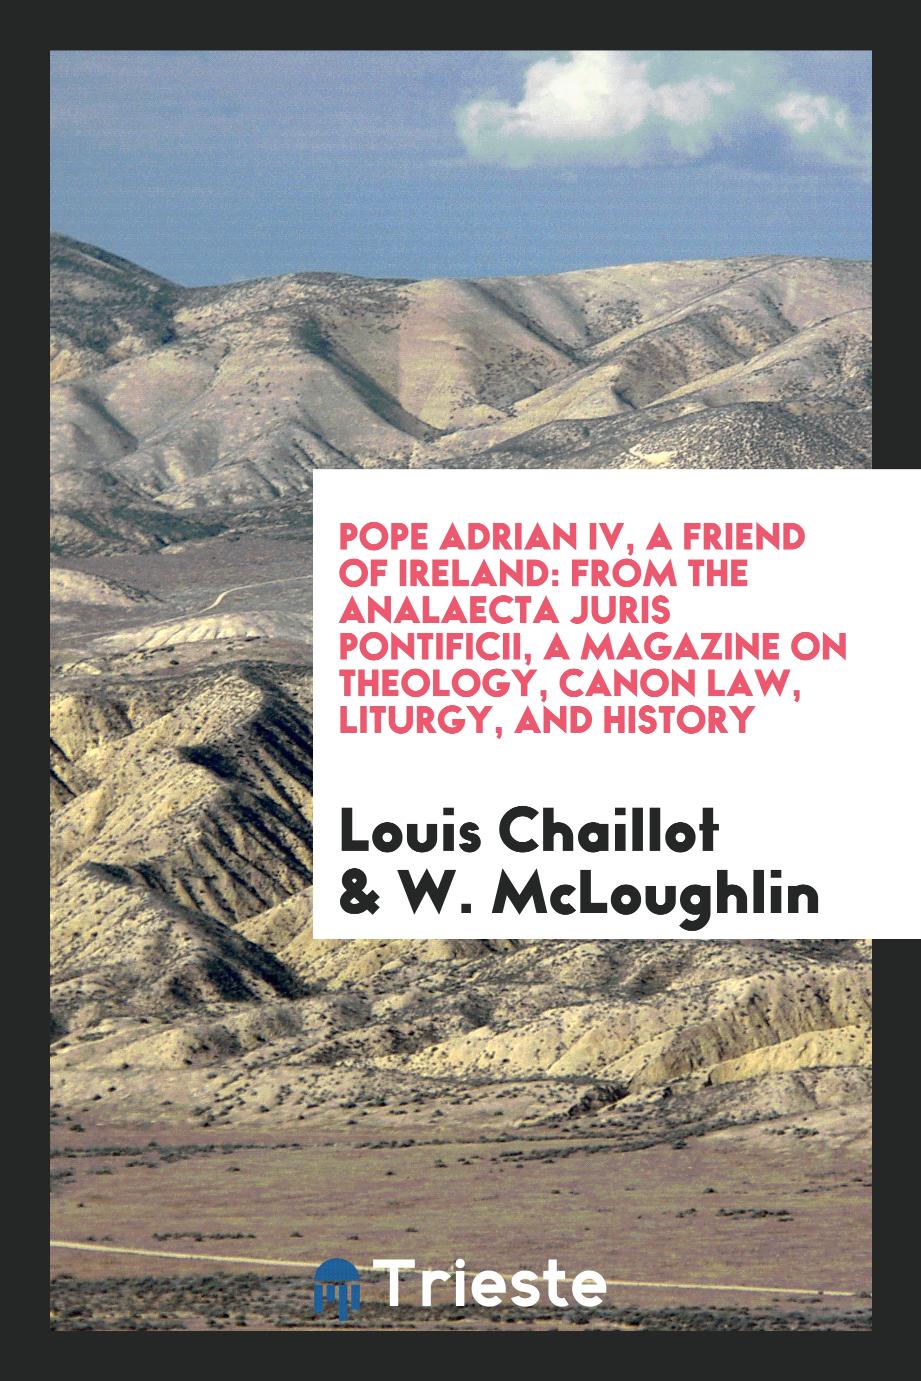 Pope Adrian IV, a Friend of Ireland: From the Analaecta Juris Pontificii, a Magazine on Theology, Canon Law, Liturgy, and History